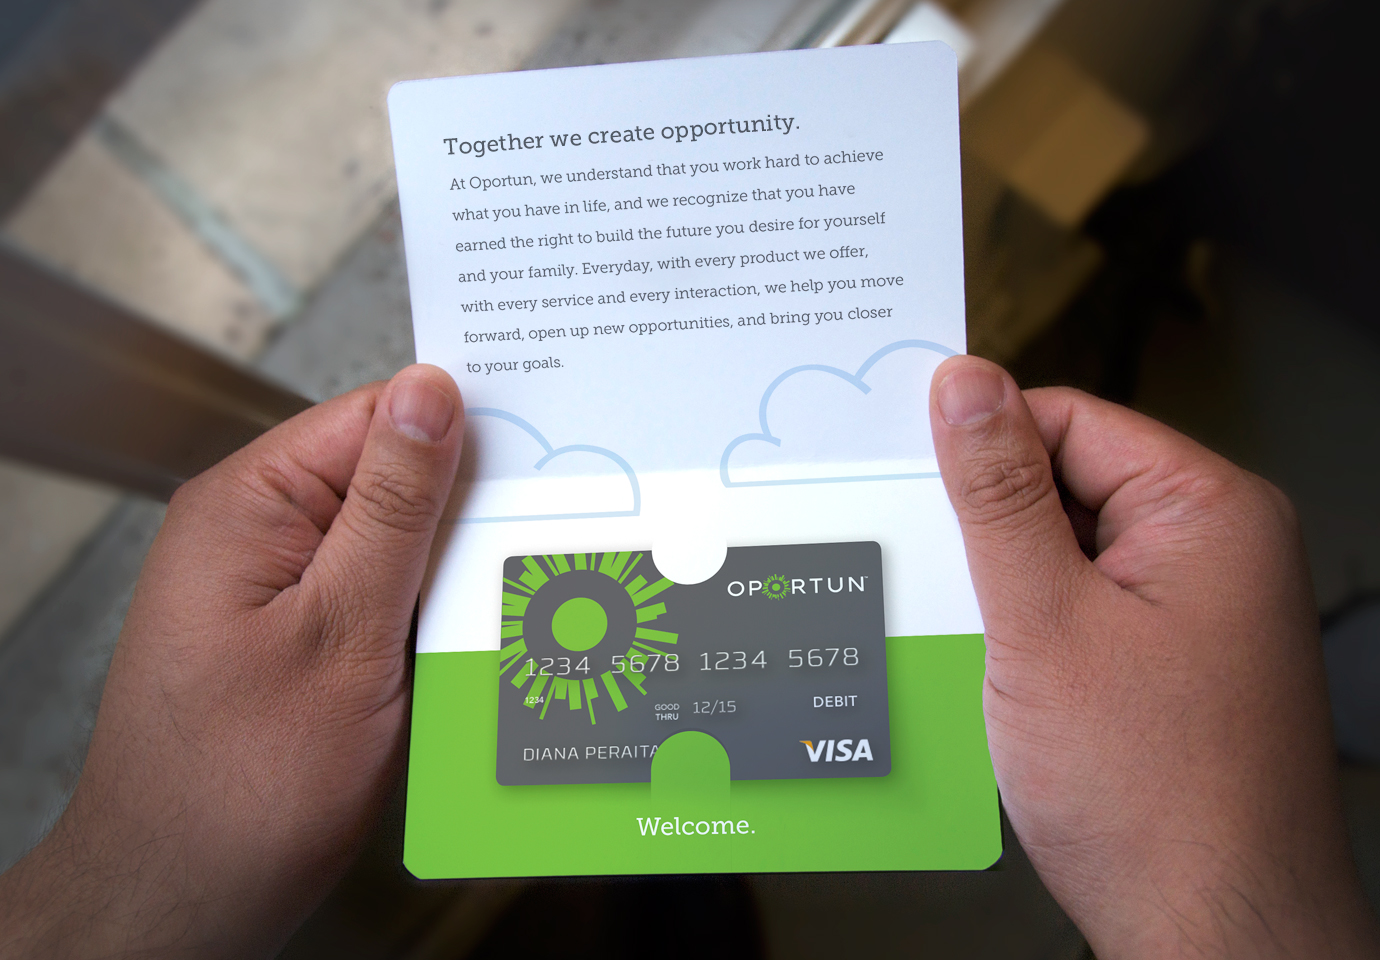 An open Oportun debit card package with the headline "Together we create opportunity" and a new Visa bank card.